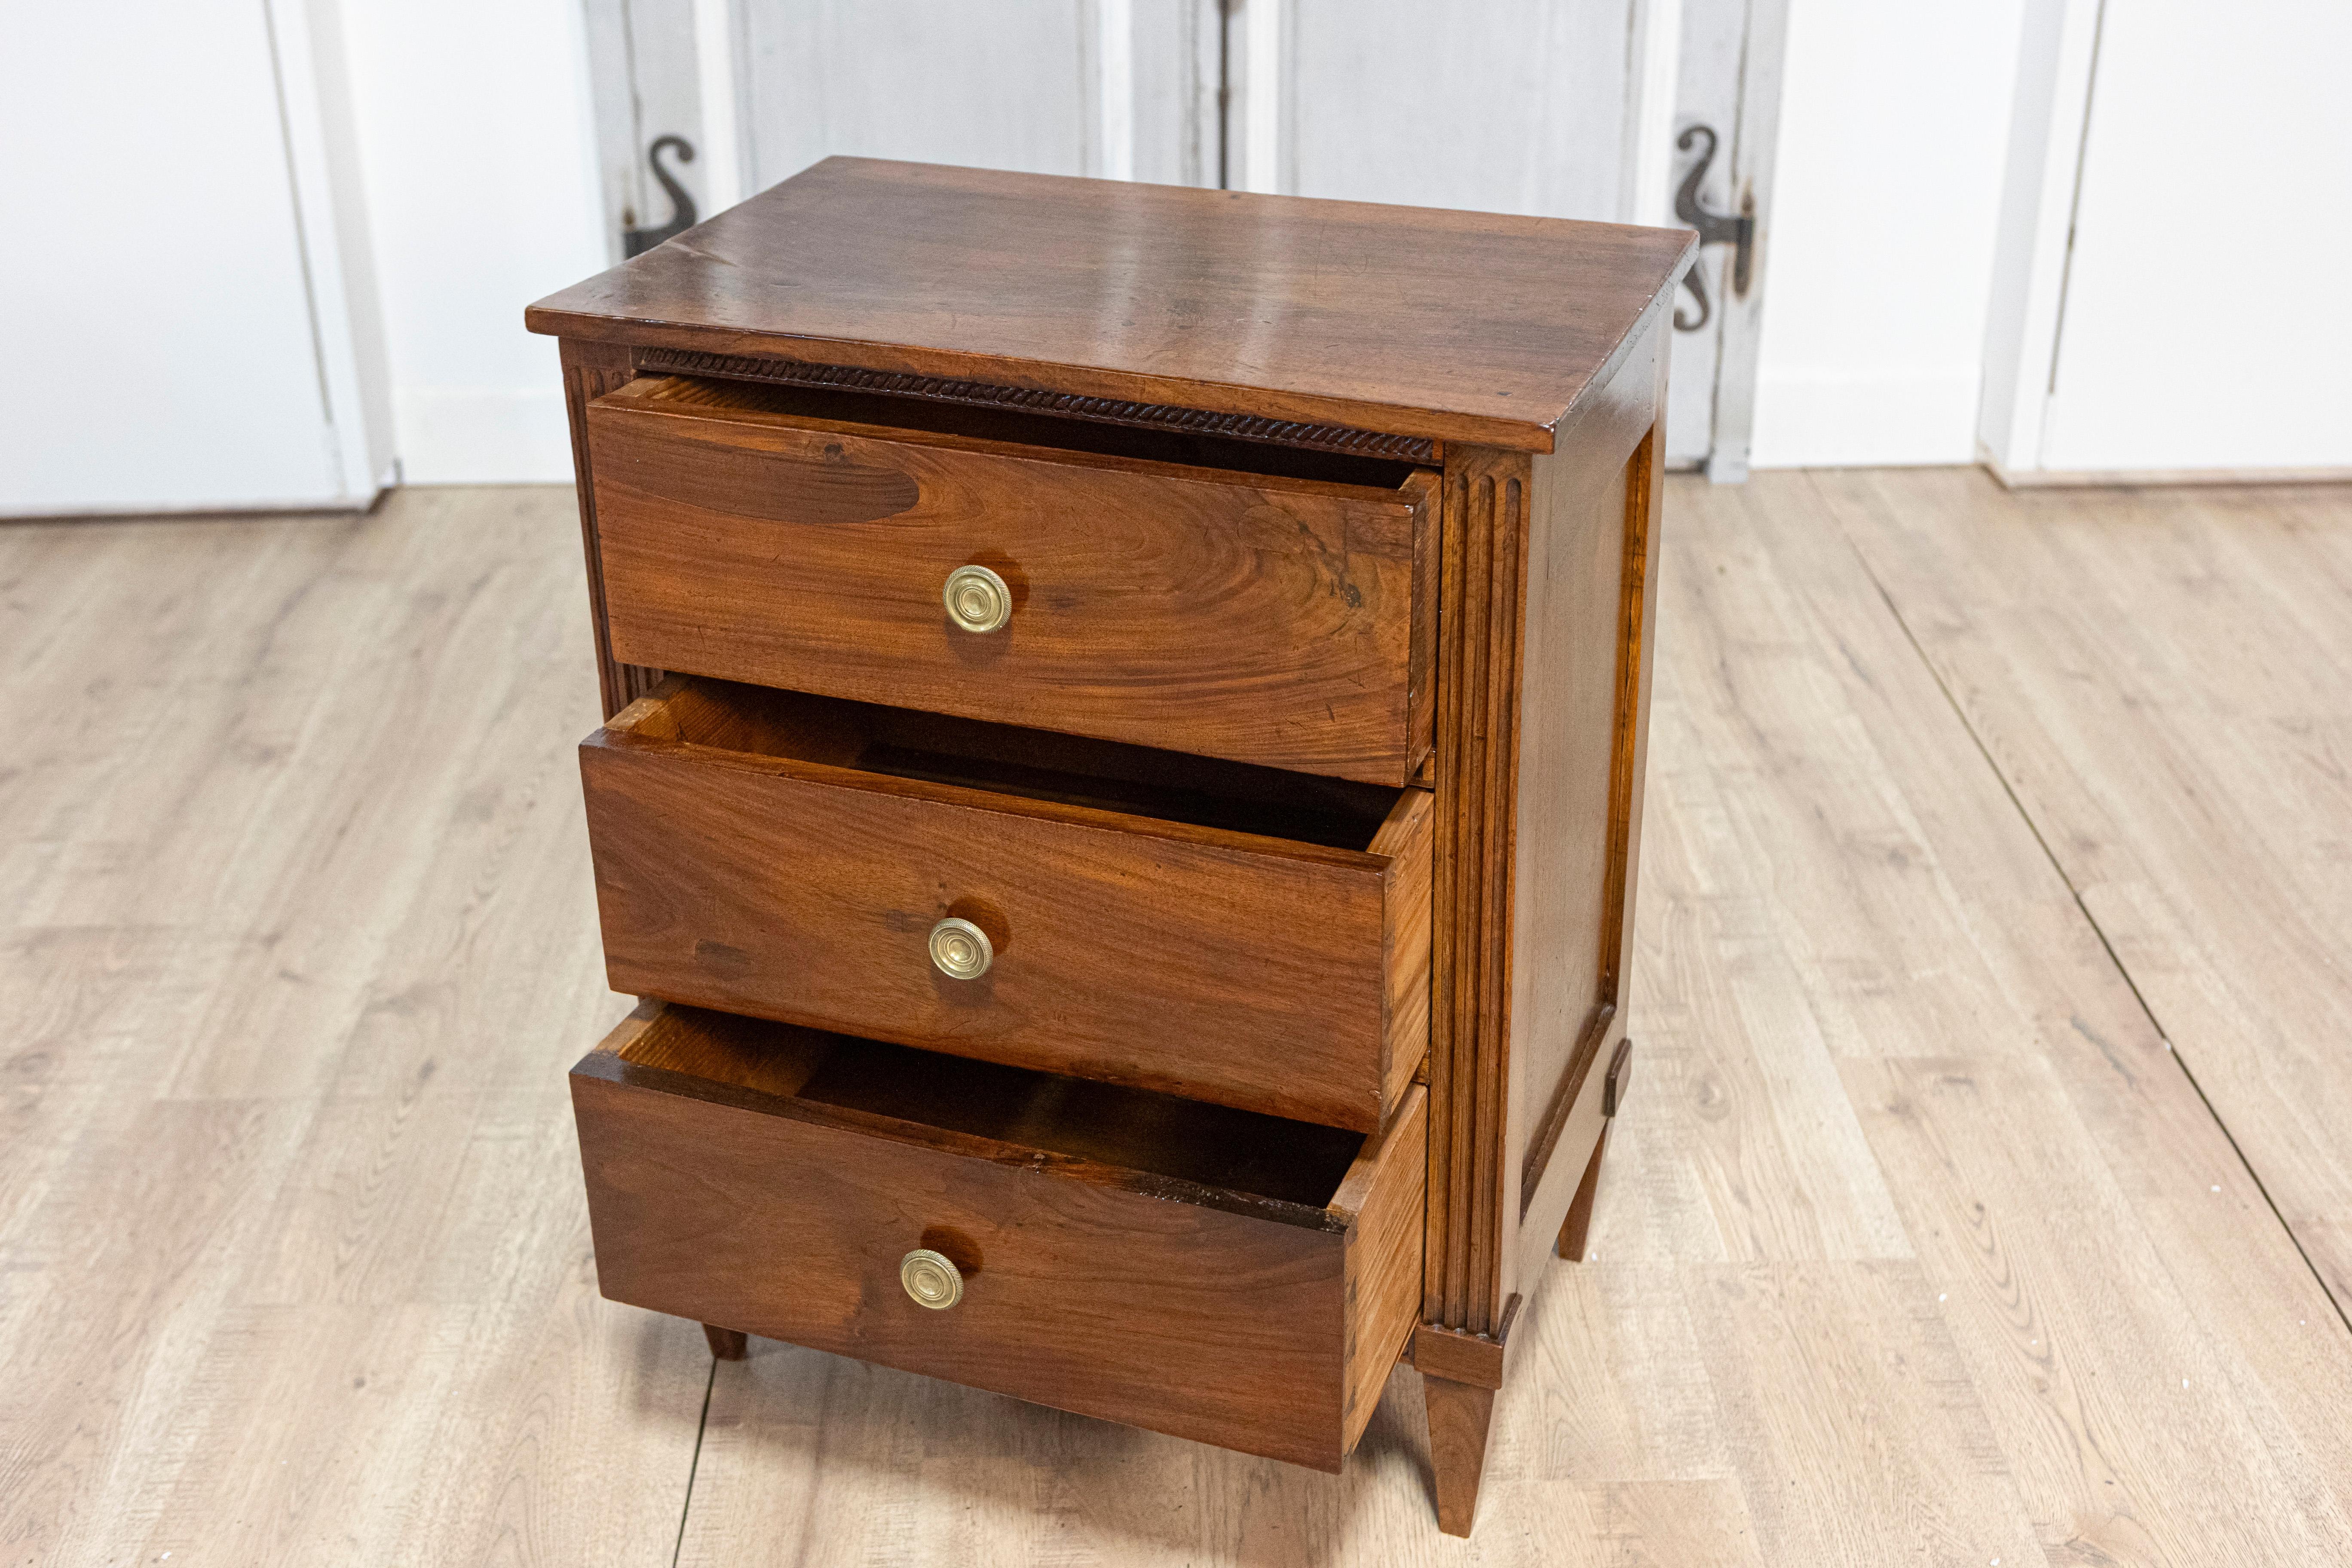 Italian Directoire Period Late 18th Century Three Drawer Walnut Bedside Chest For Sale 2